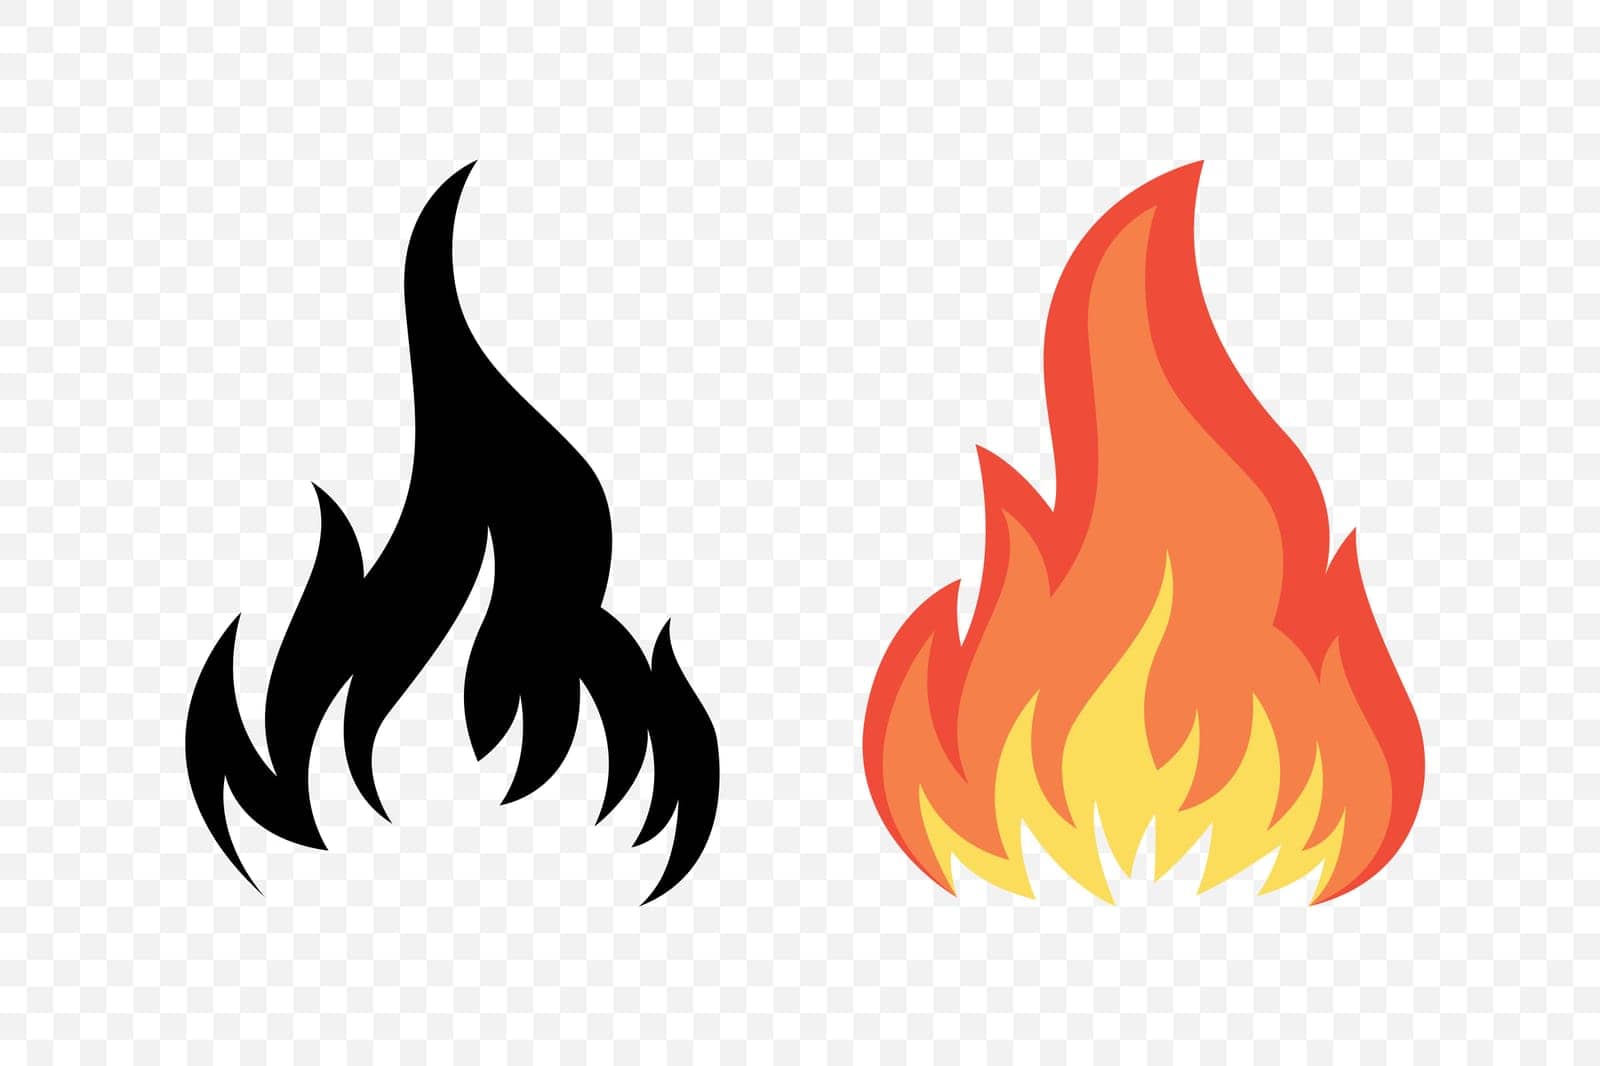 Flat Vector Fire Flame Icon Set. Campfire Shape Sign, Isolated. Bonfire Vector Illustration for Outdoor, Adventure, and Nature Concept.